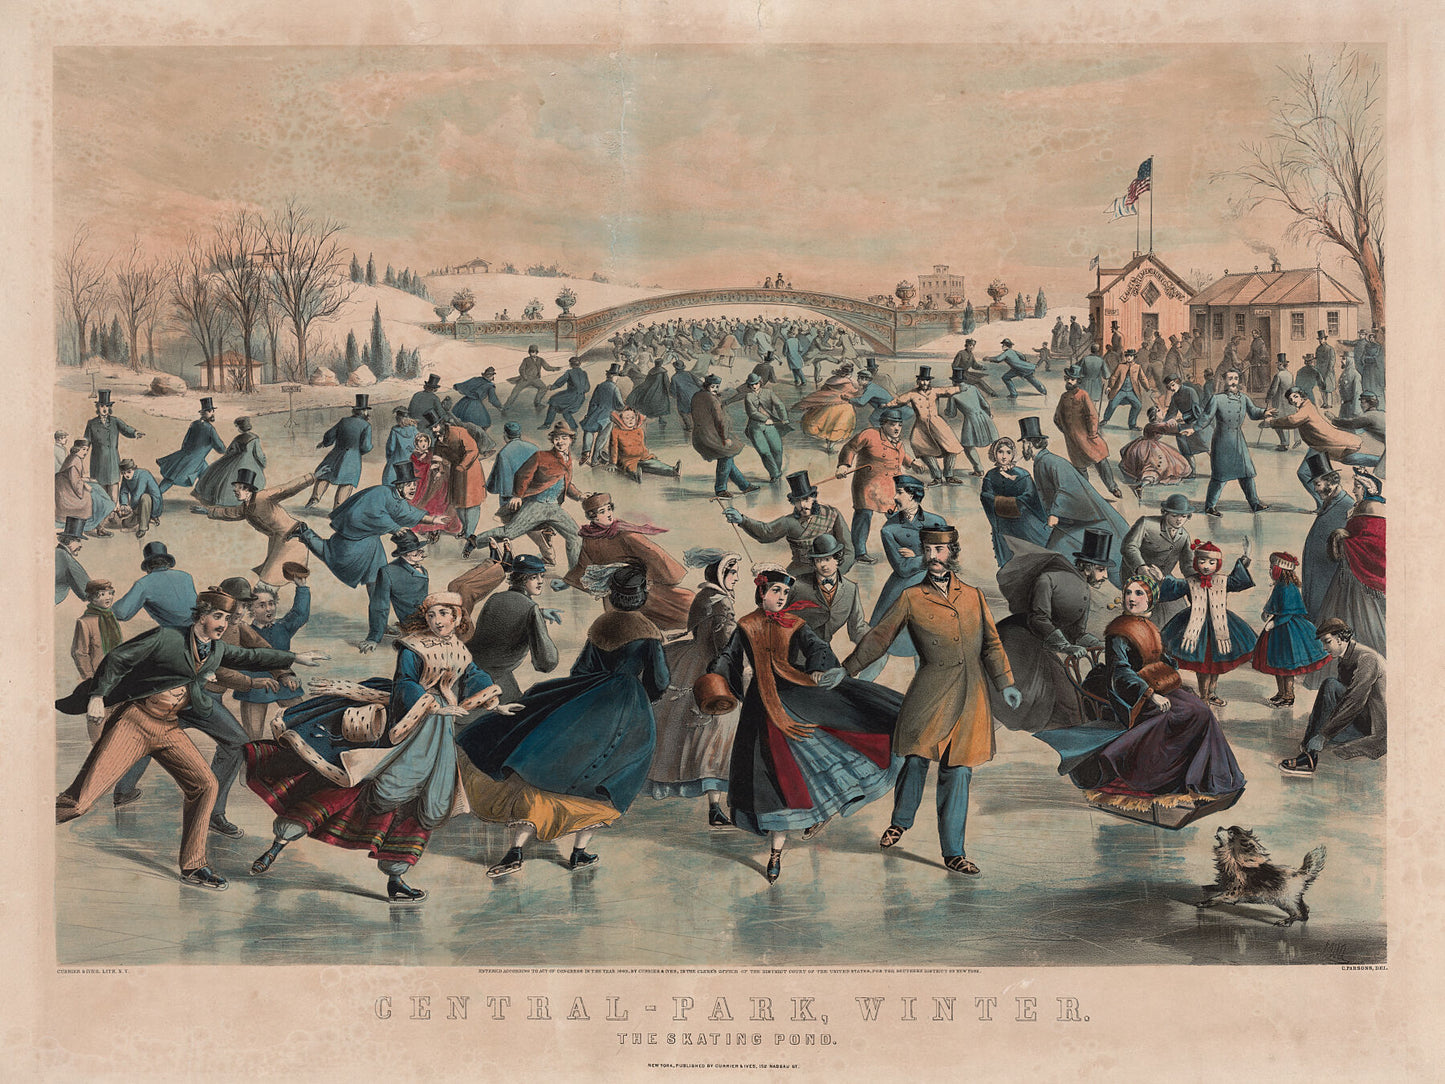 Central Park in Winter, The Skating Pond by James Merritt Ives - 1862